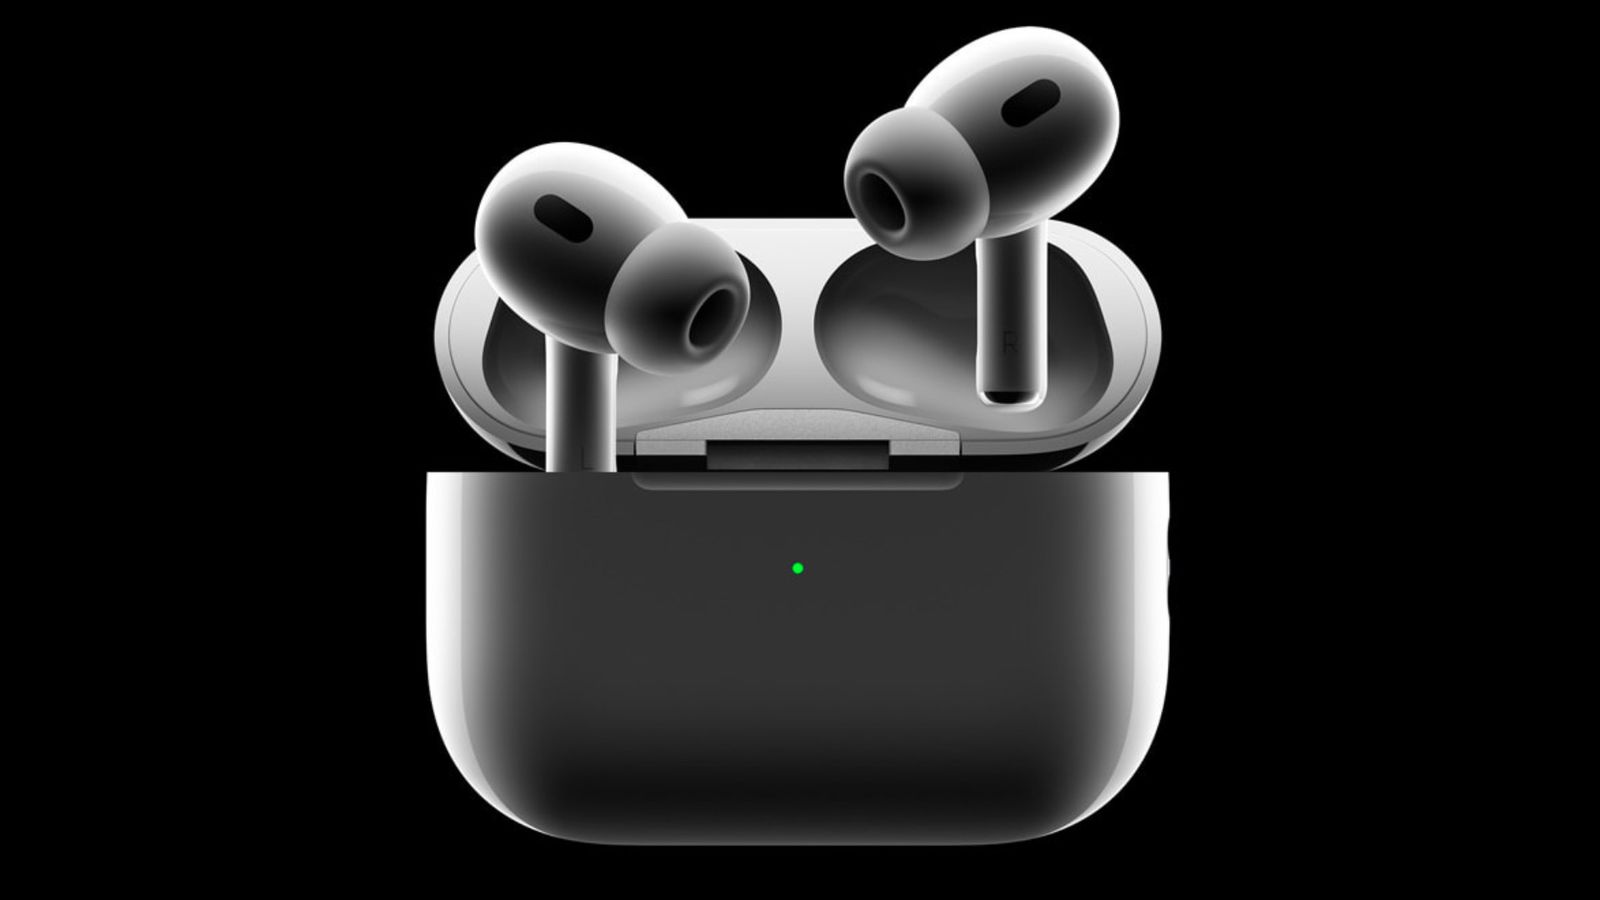 New AirPods Pro Do Not Support Lossless Apple Music - MacRumors